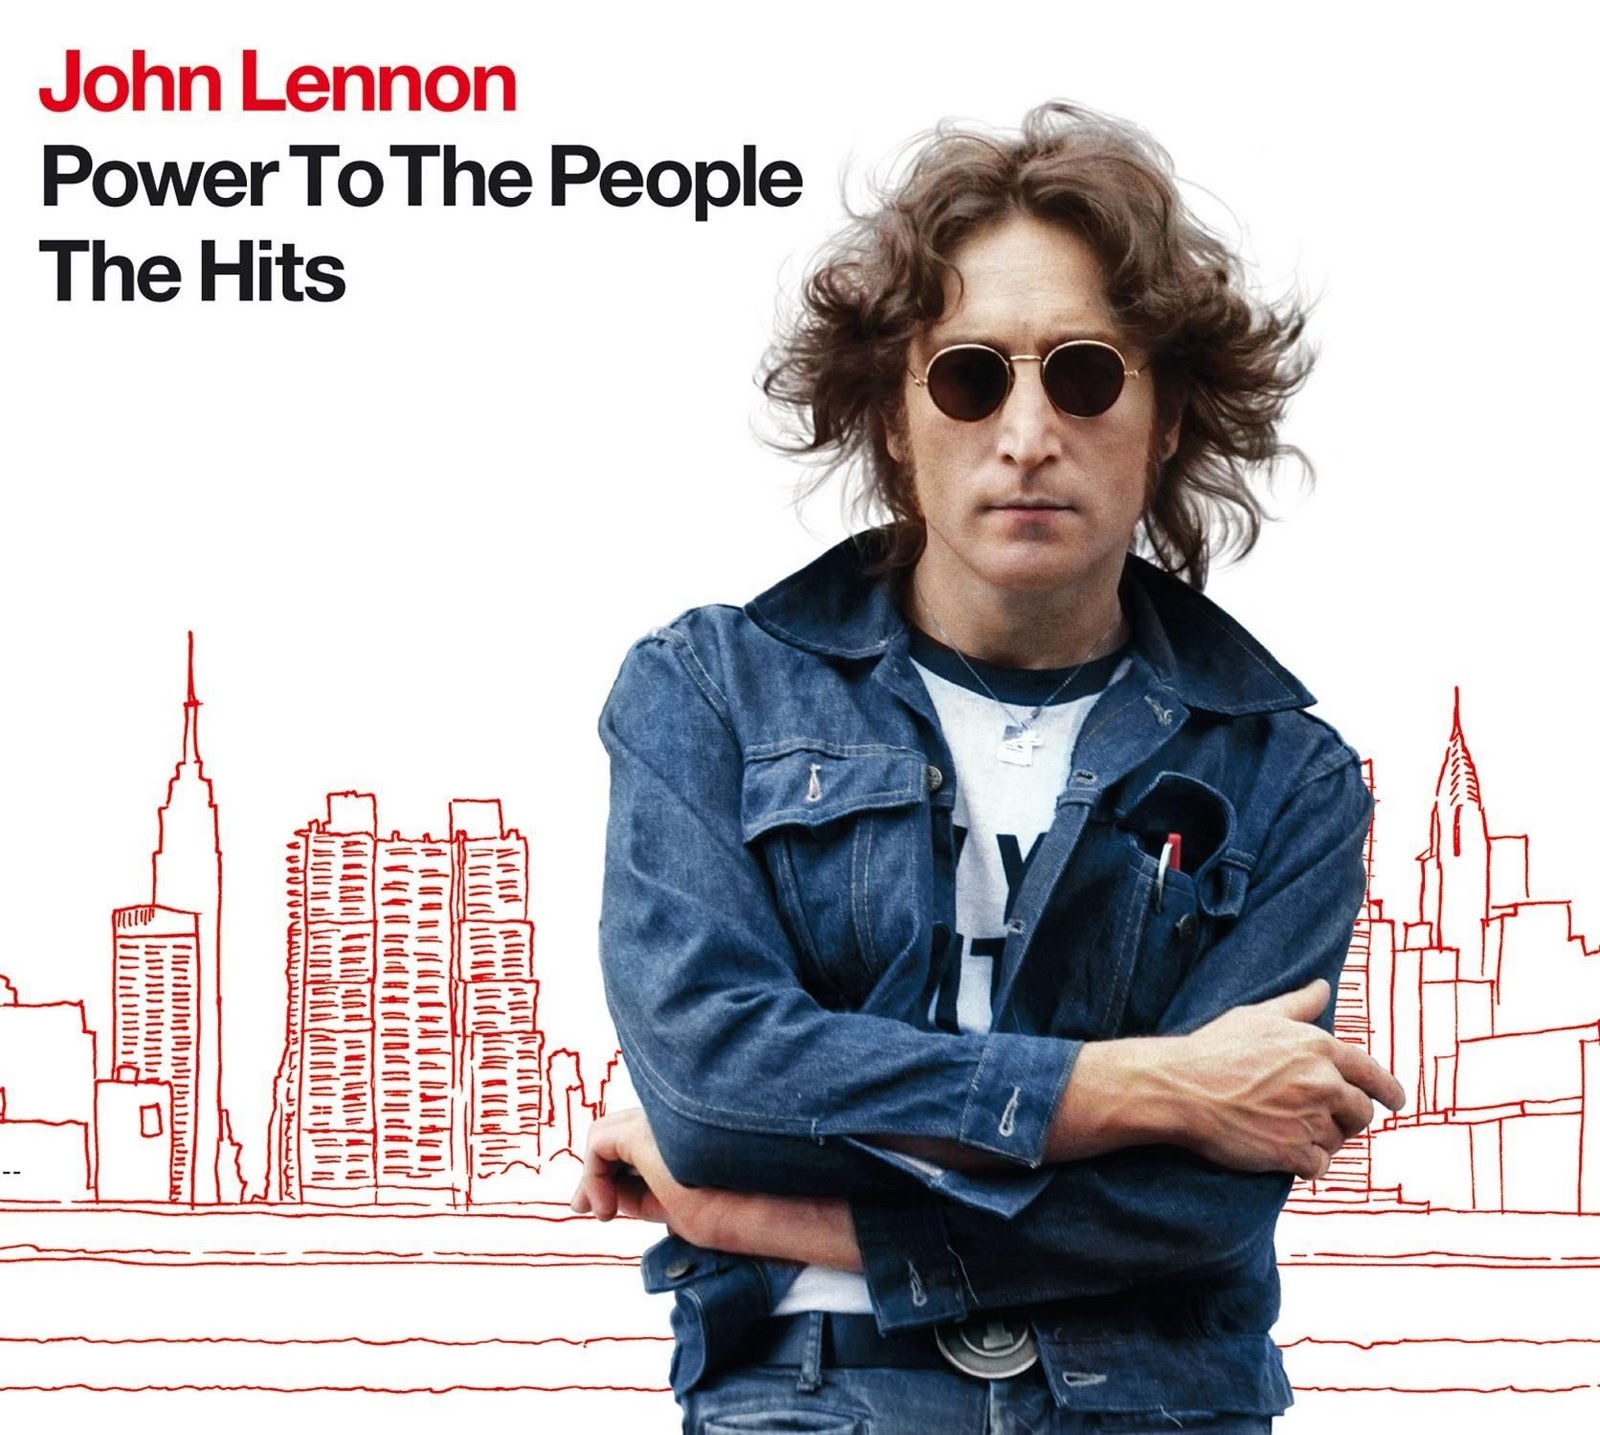 john_lennon_power_to_the_people_the_hits_discovery_edition_2010_retail_cd-front.jpg